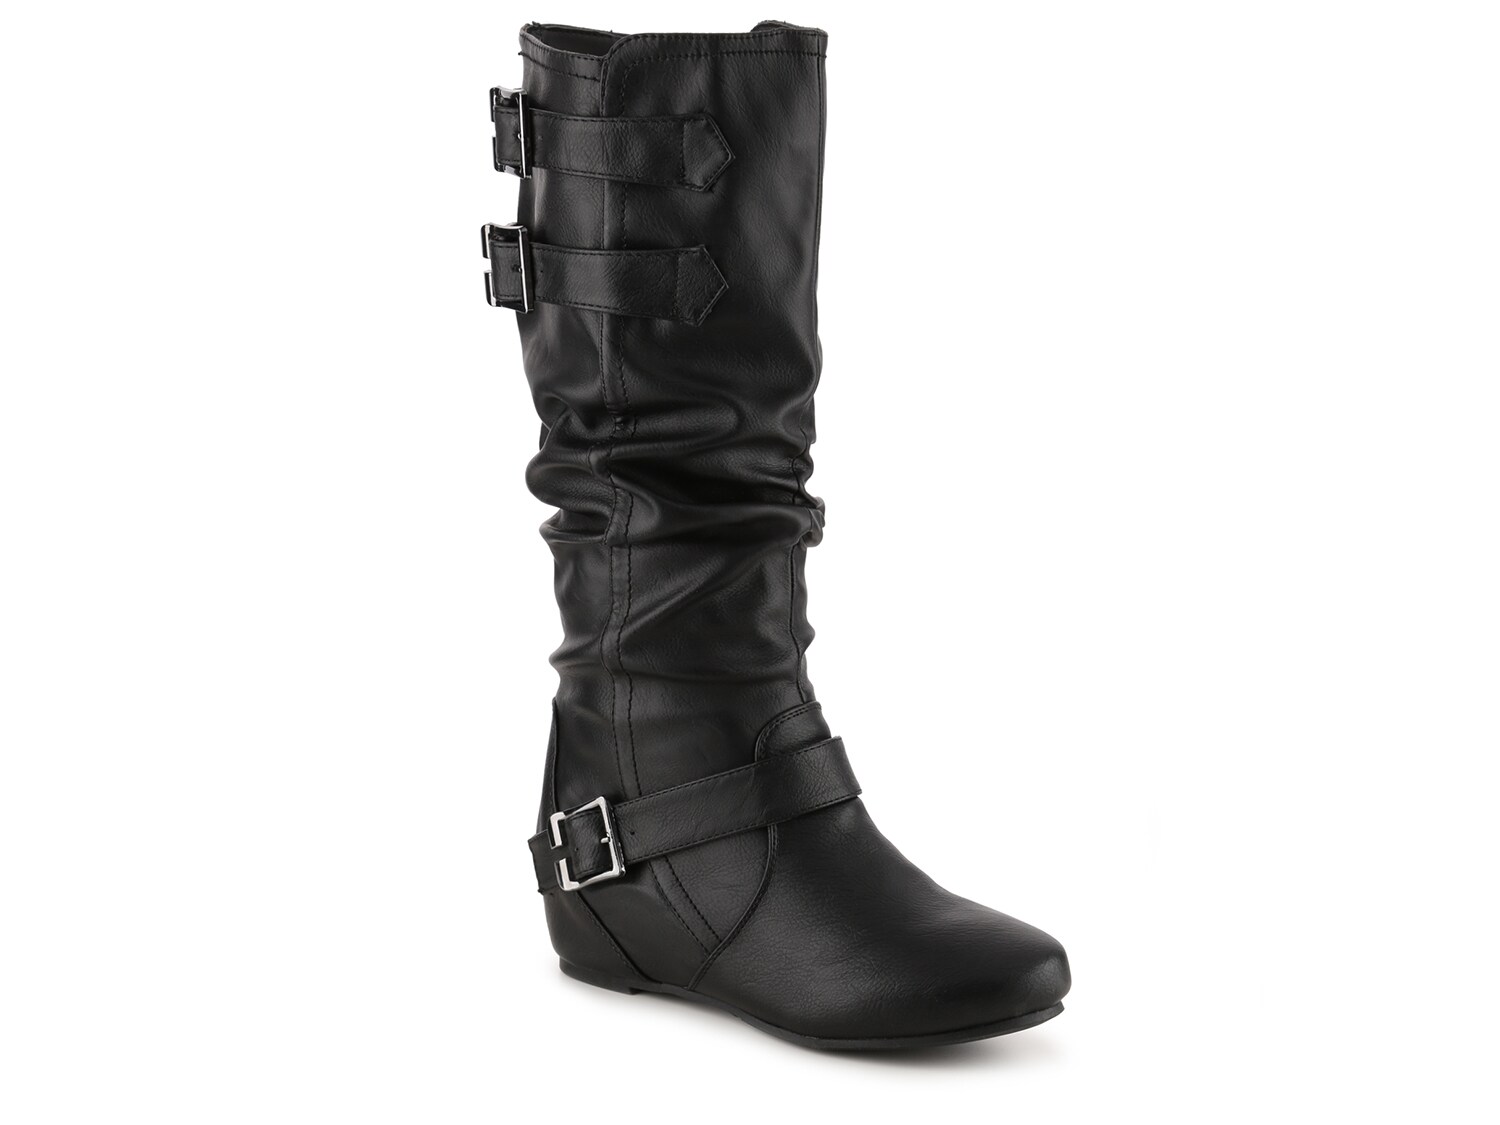 journee collection tiffany boot